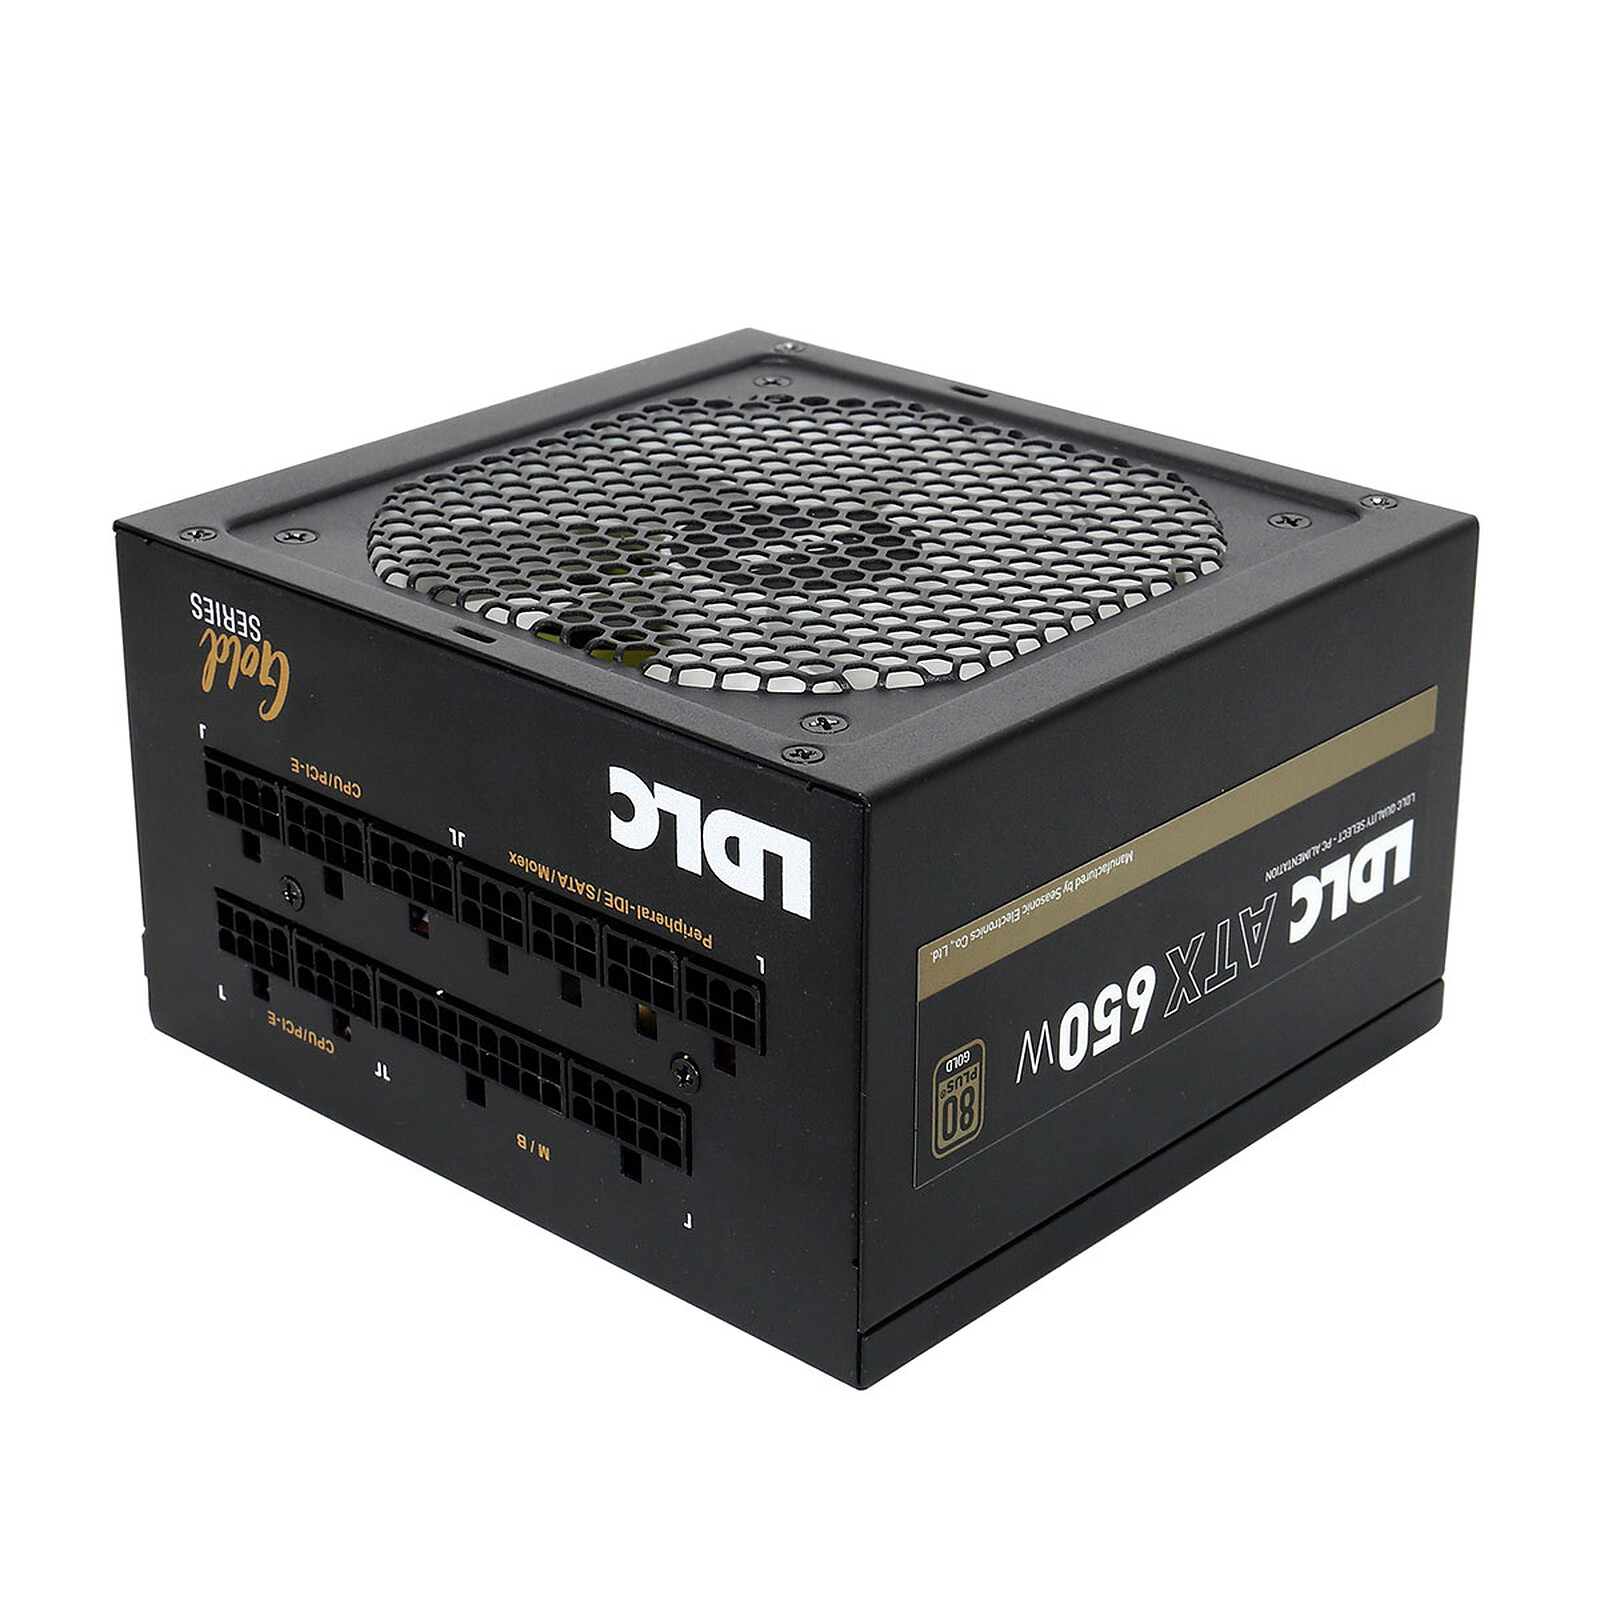 LDLC US-650G Quality Select 80PLUS Gold